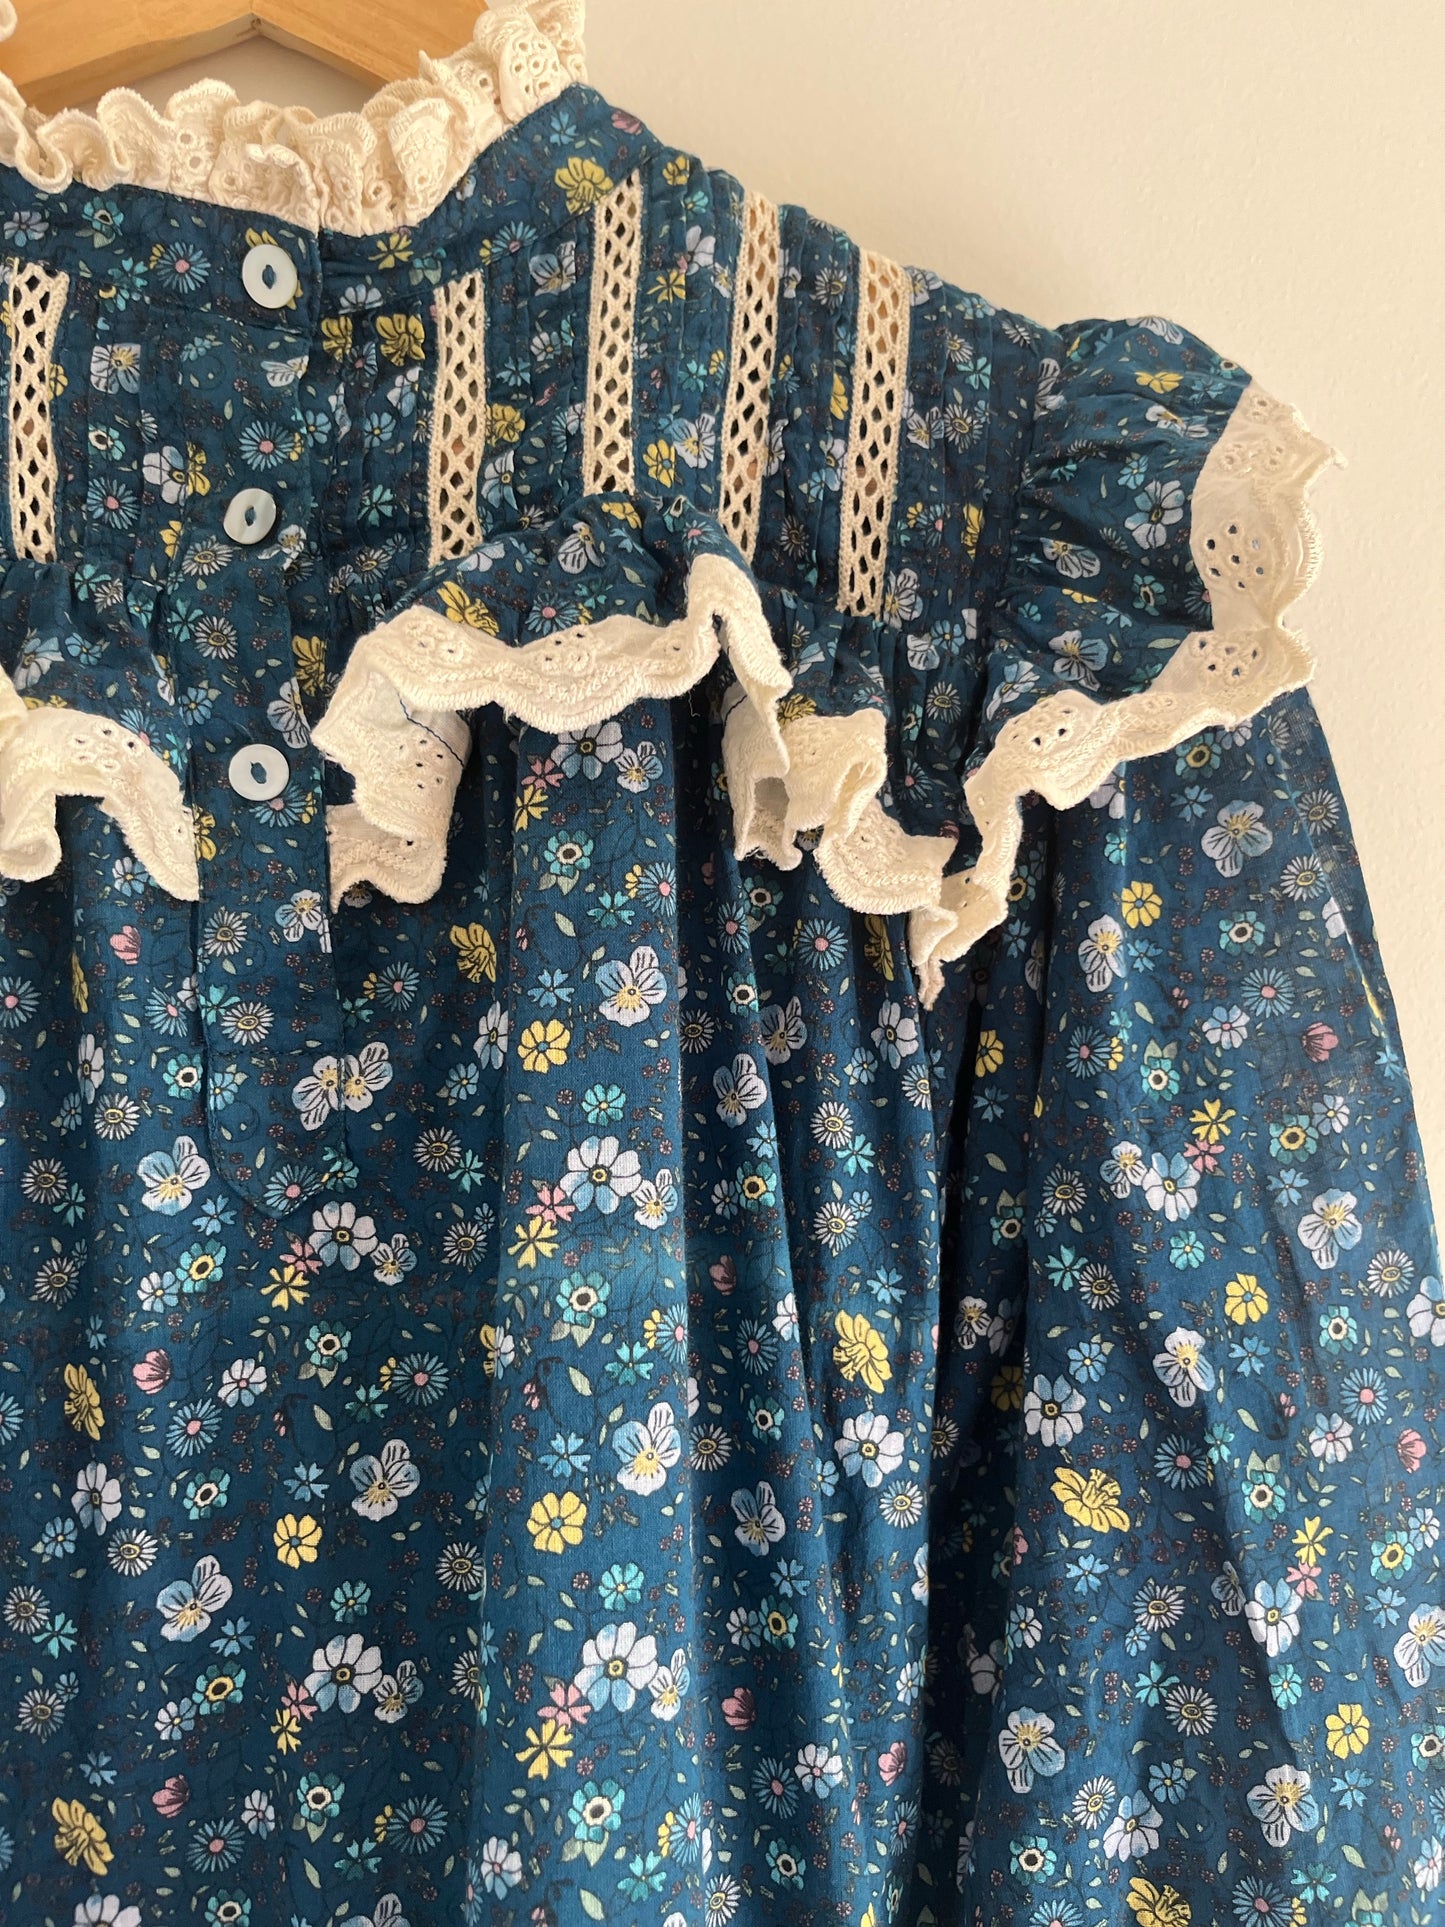 SECOND - 100% RECYCLED COTTON - CLOTHILDE DRESS BLUE FLORAL